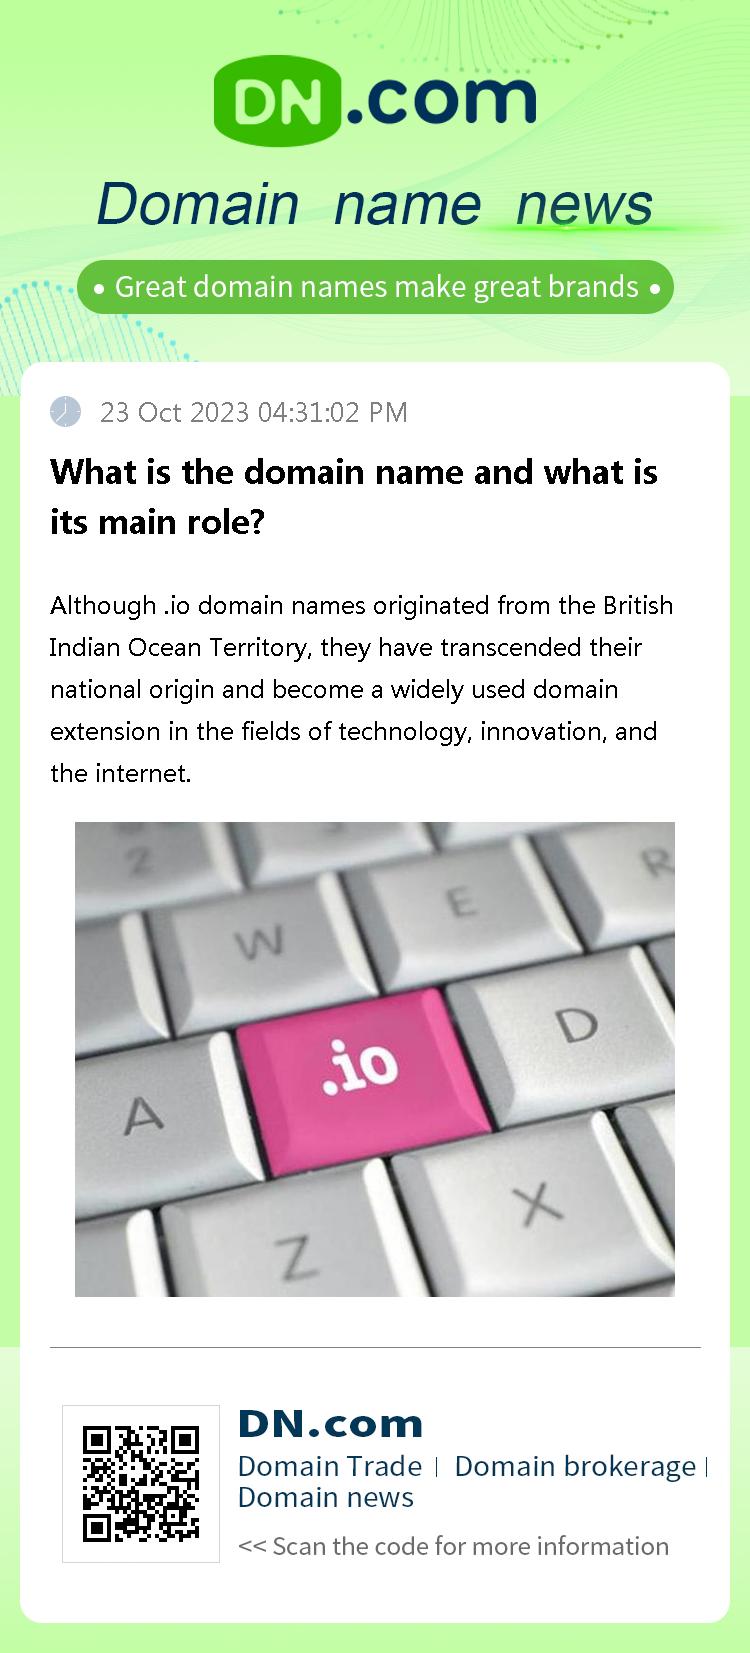 What is the domain name and what is its main role?